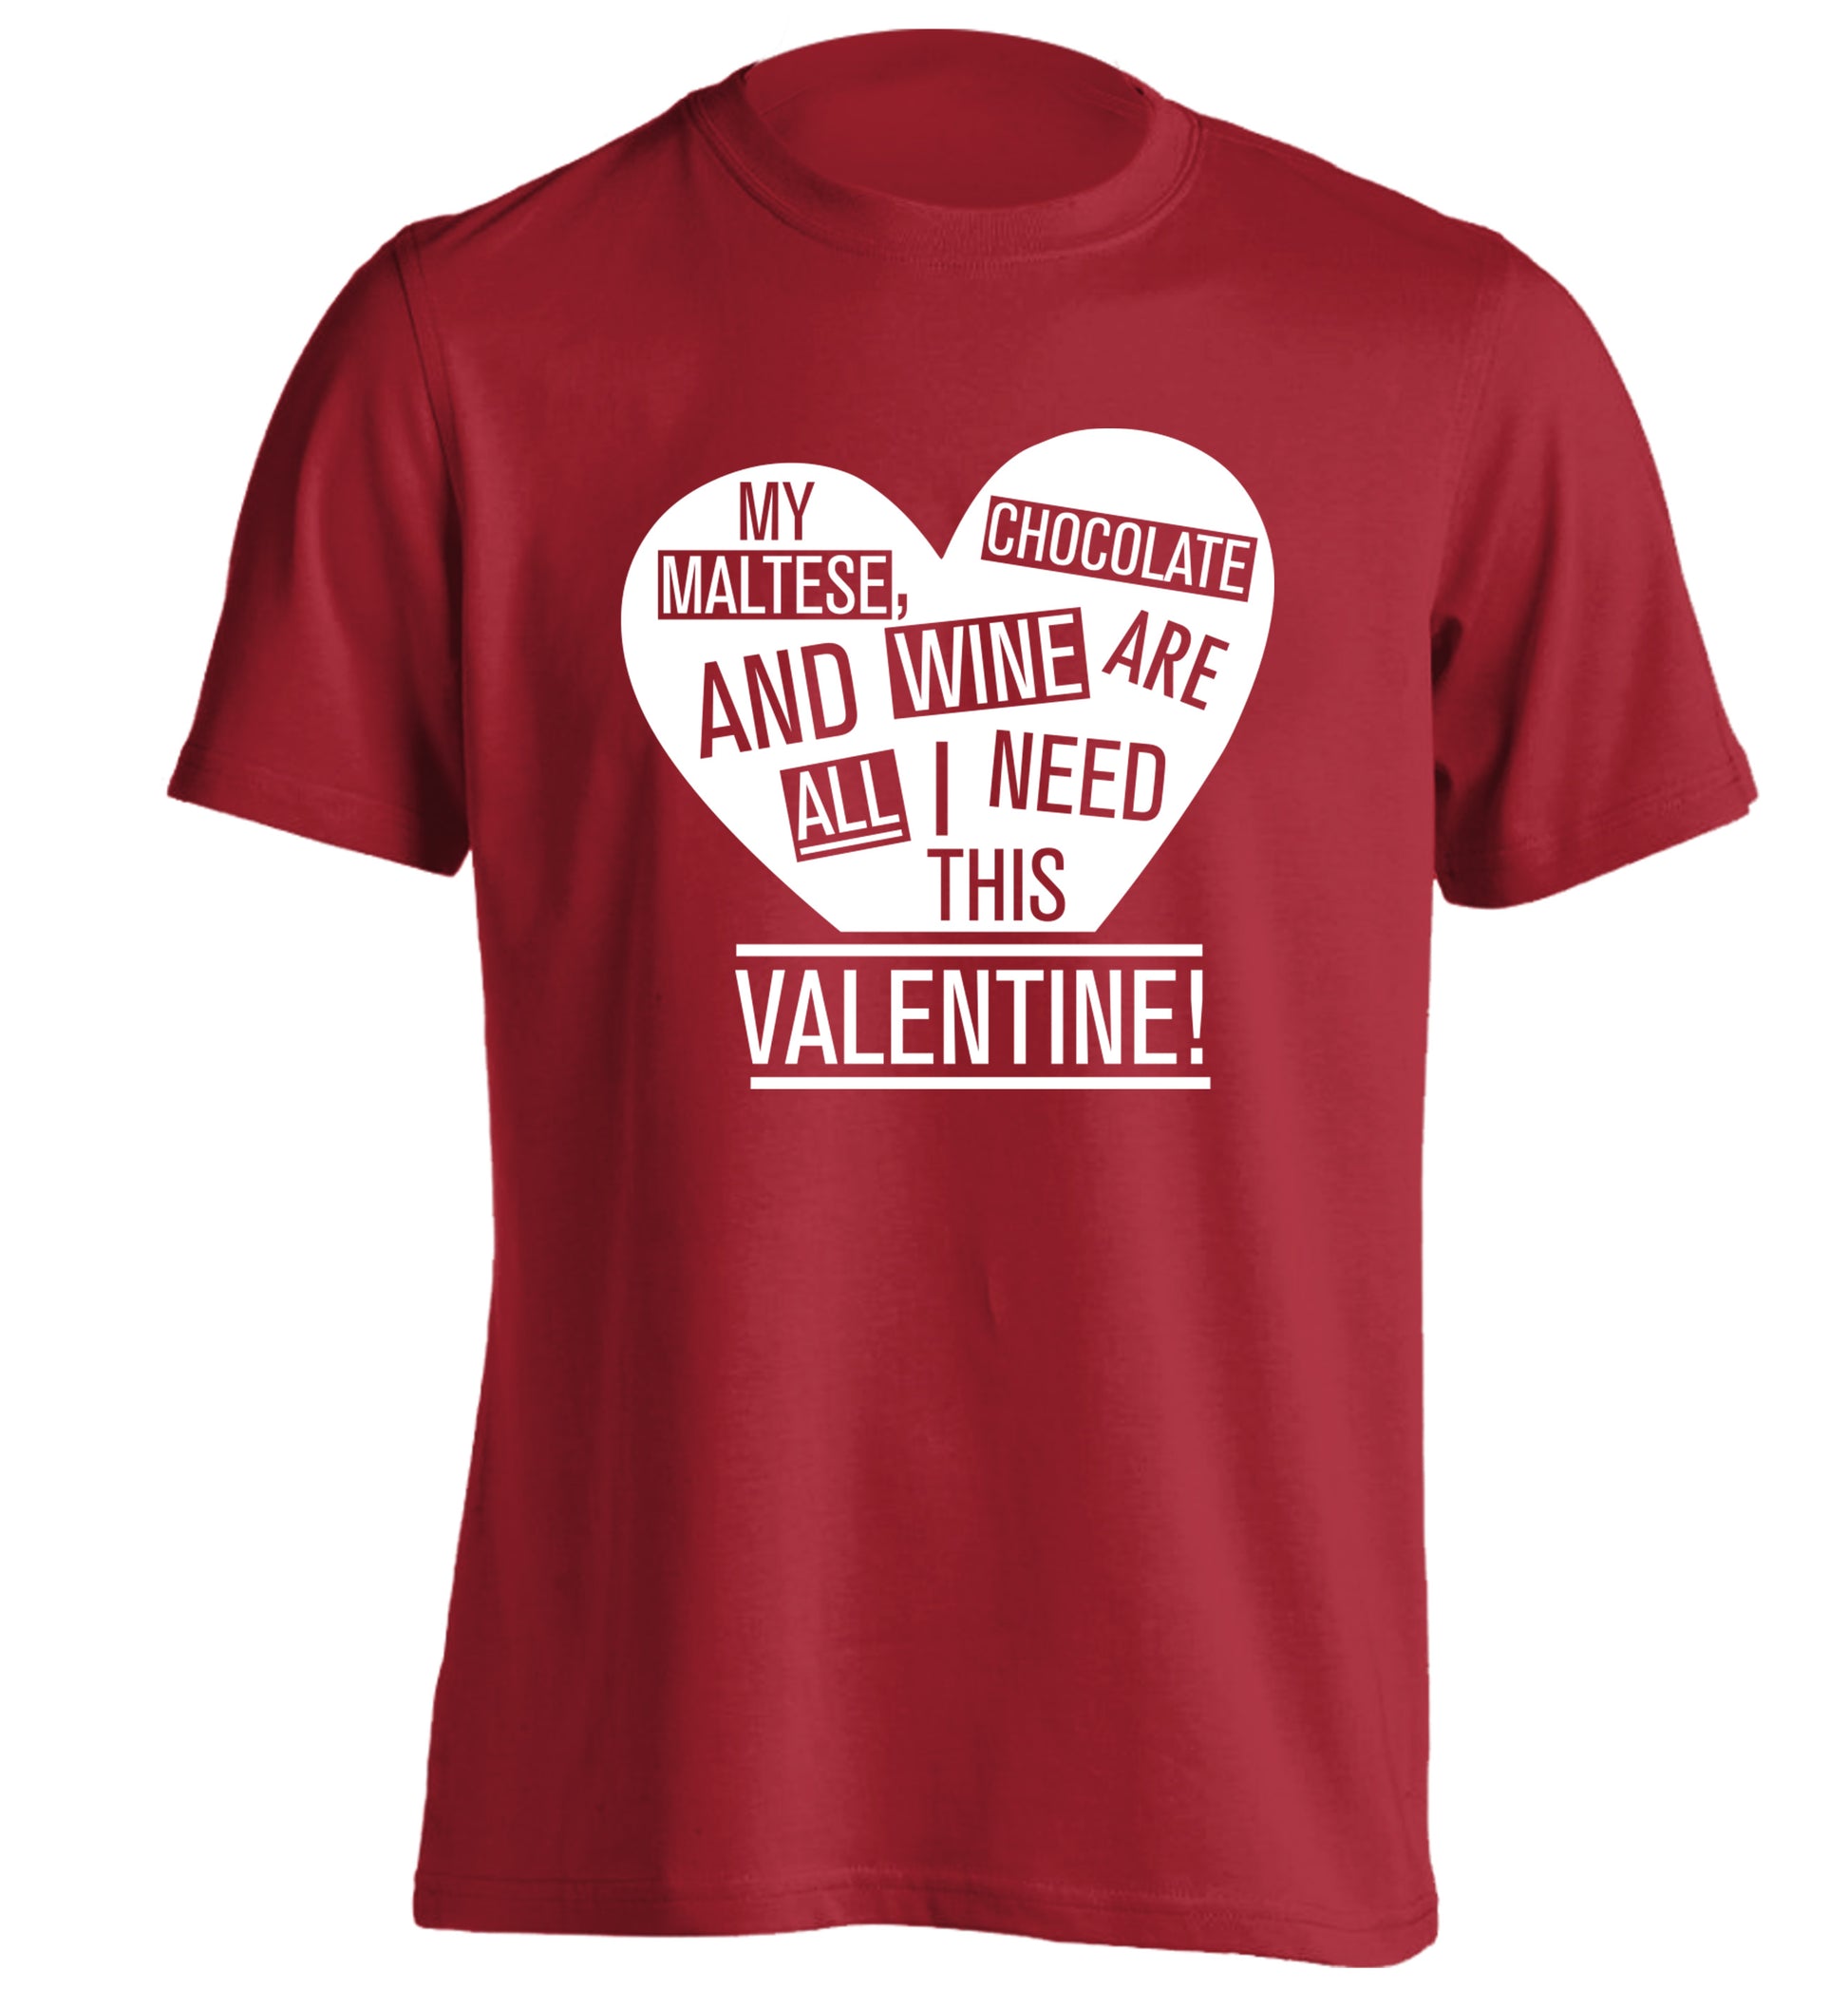 My maltese, chocolate and wine are all I need this valentine! adults unisex red Tshirt 2XL